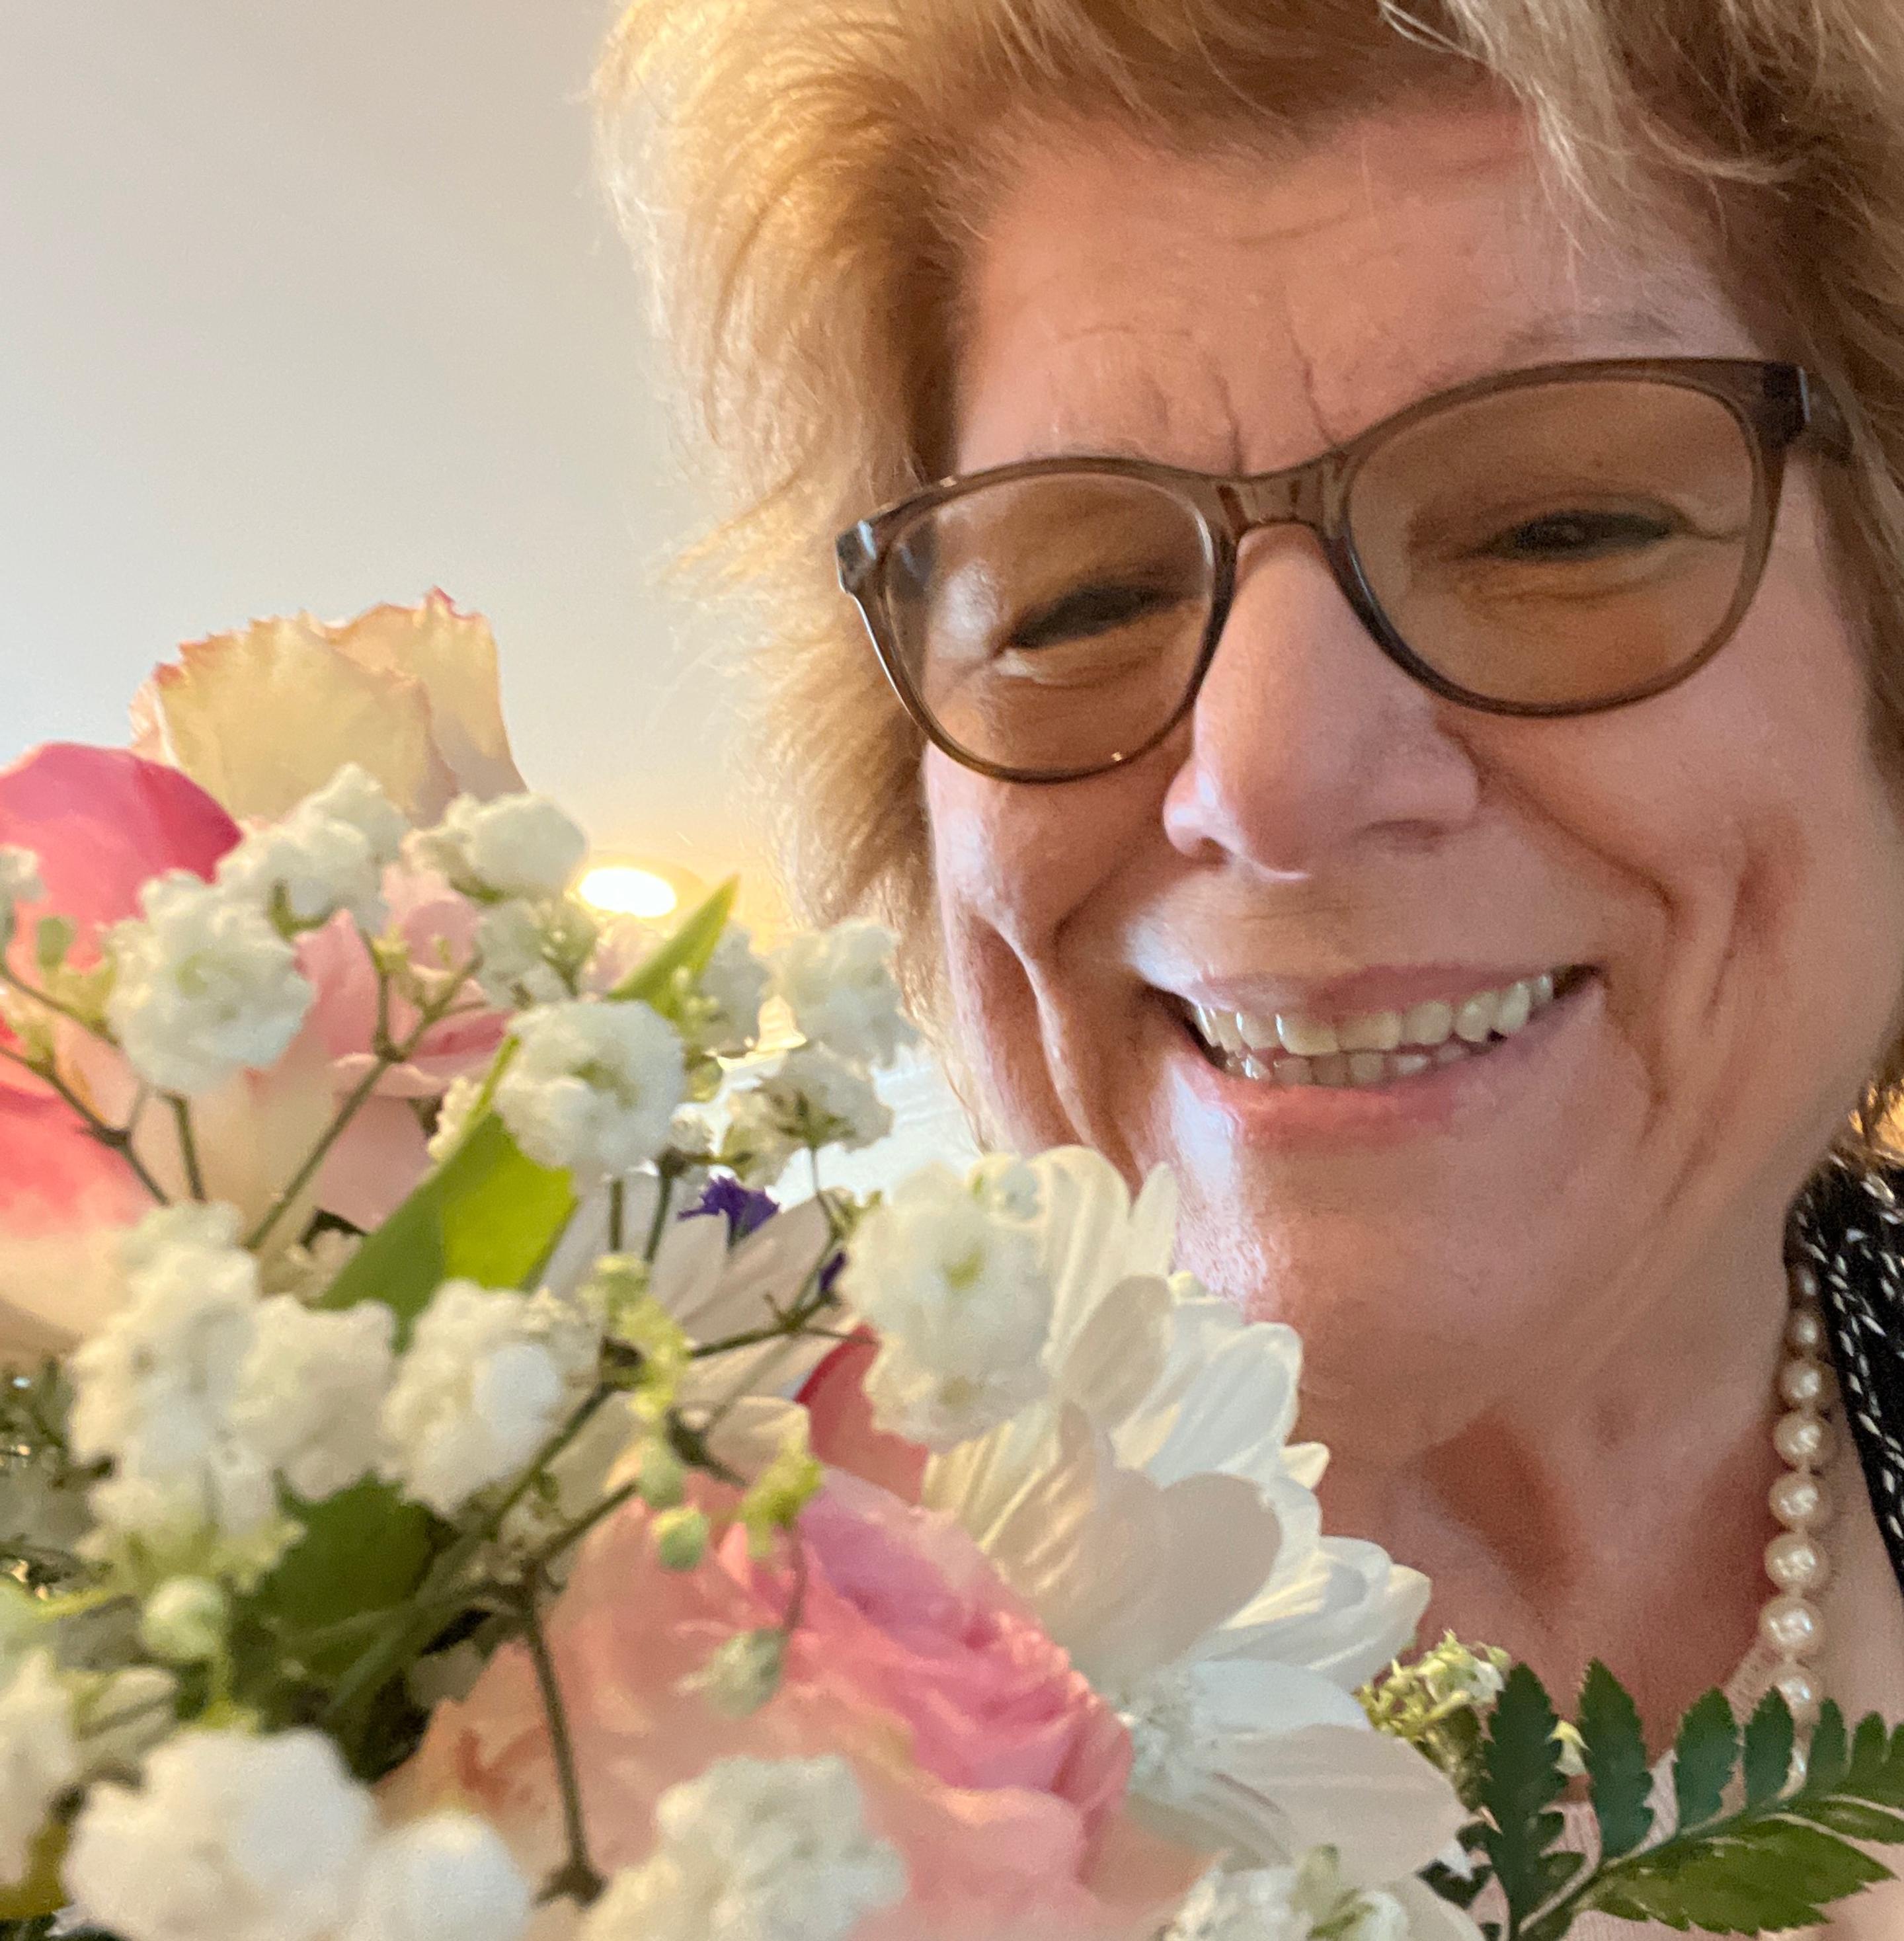 Mom smiling, wearing glasses and holding birthday roses pink and white